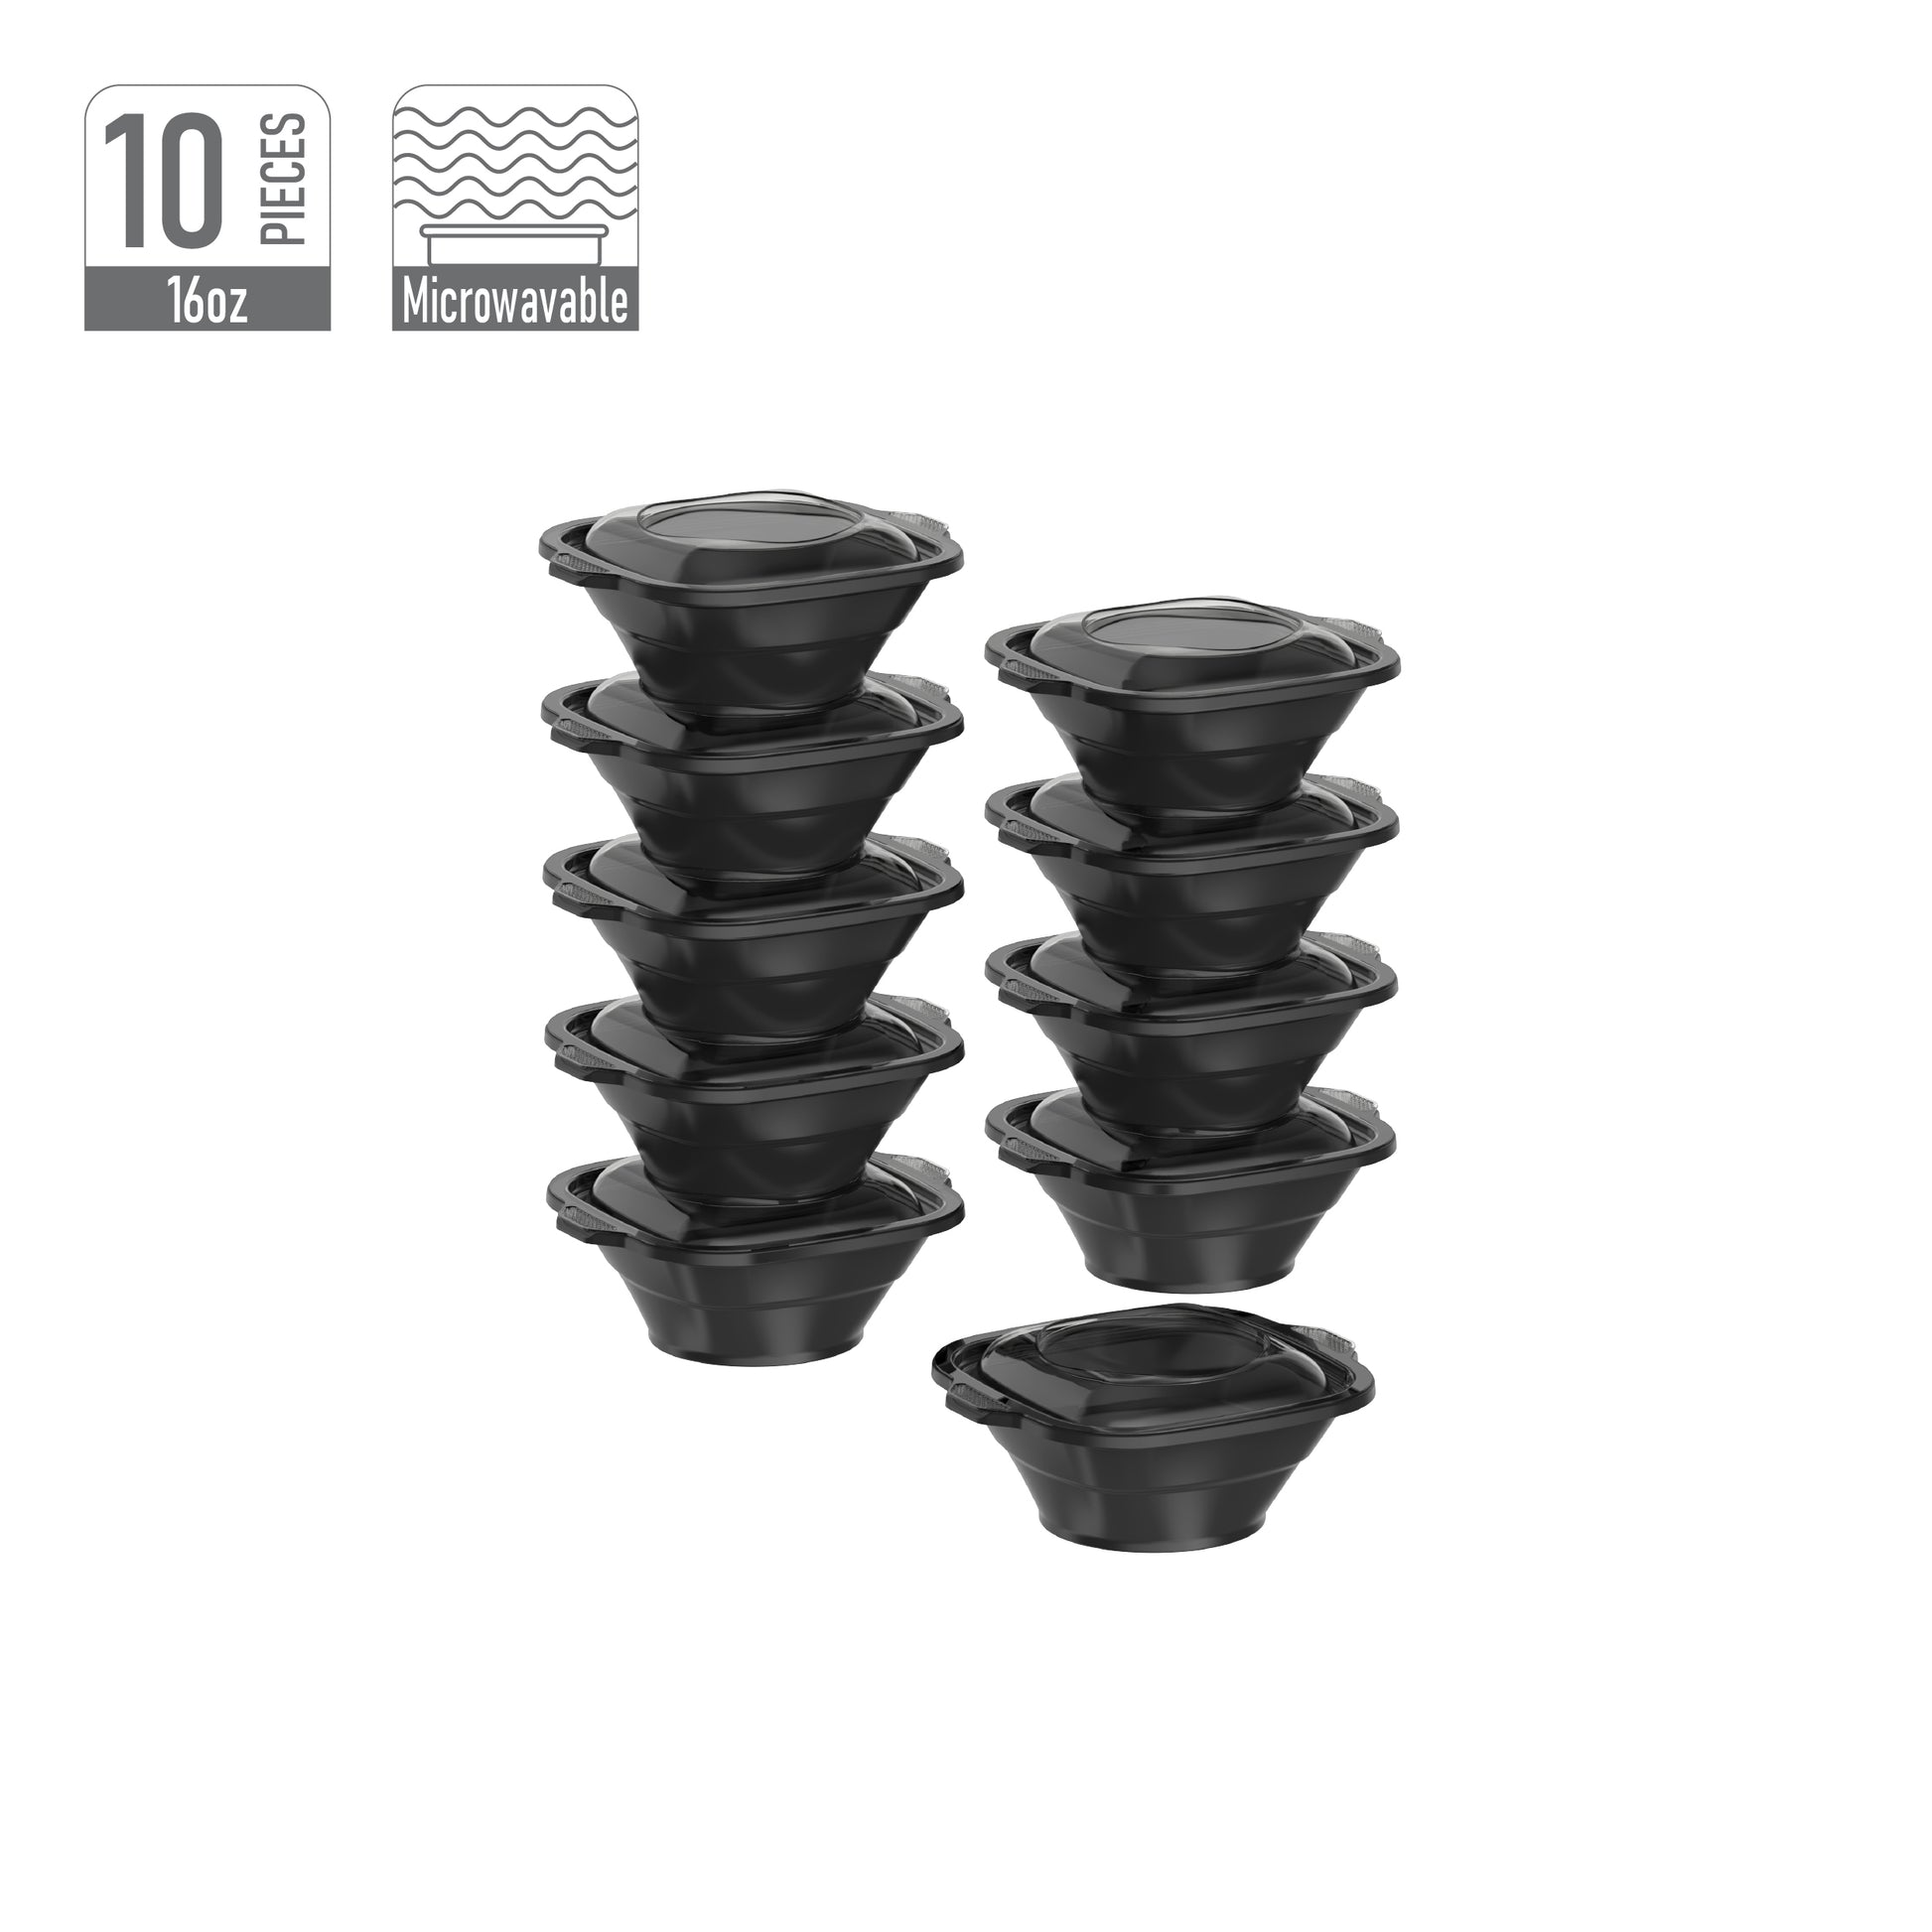 16 oz Pack of 10 Square Microwave Bowls with Clear Lids